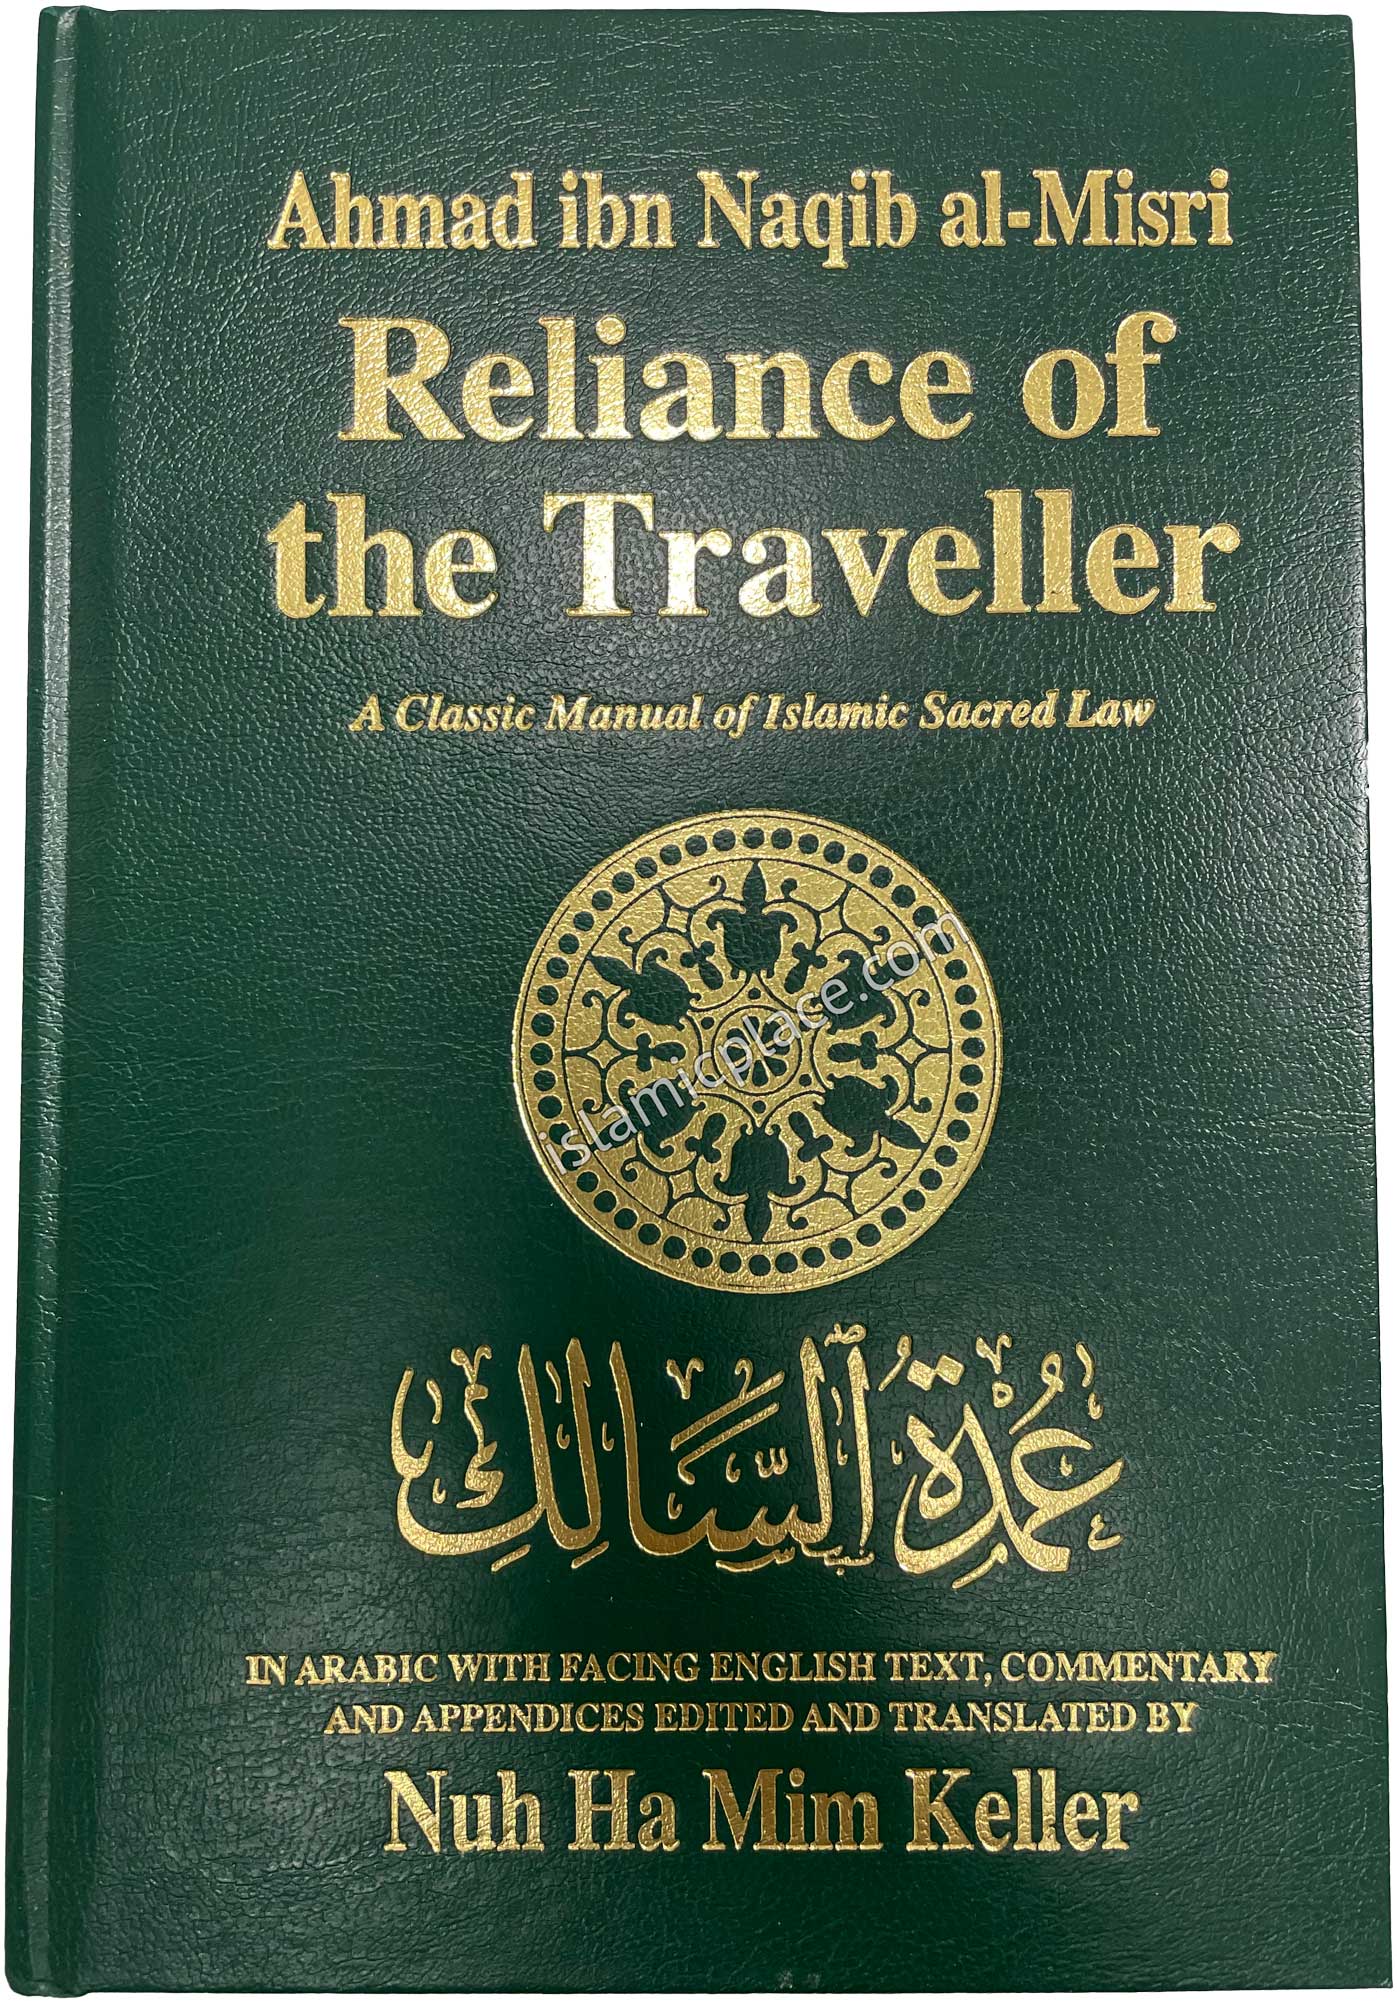 Reliance of the Traveller - A Classic Manual of Islamic Sacred Law